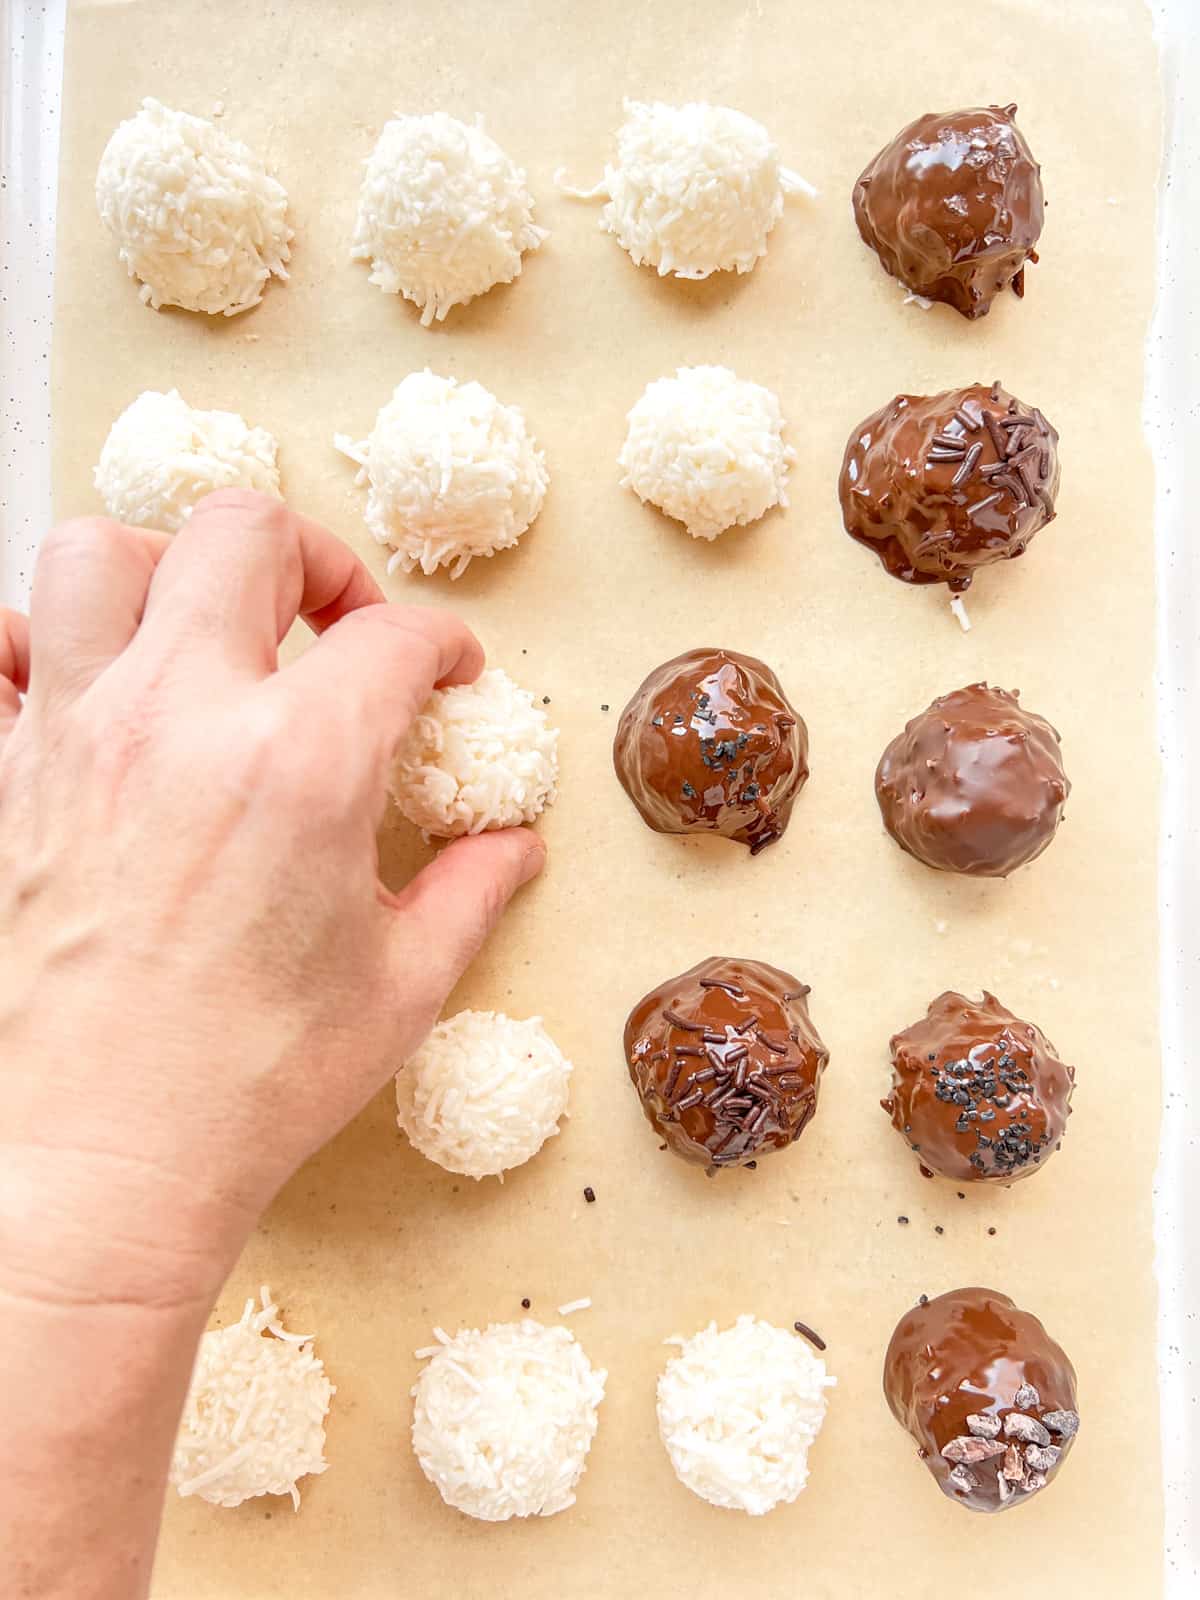 An image of a hand picking up a coconut bonbon from a tray filled with bonbons being made.